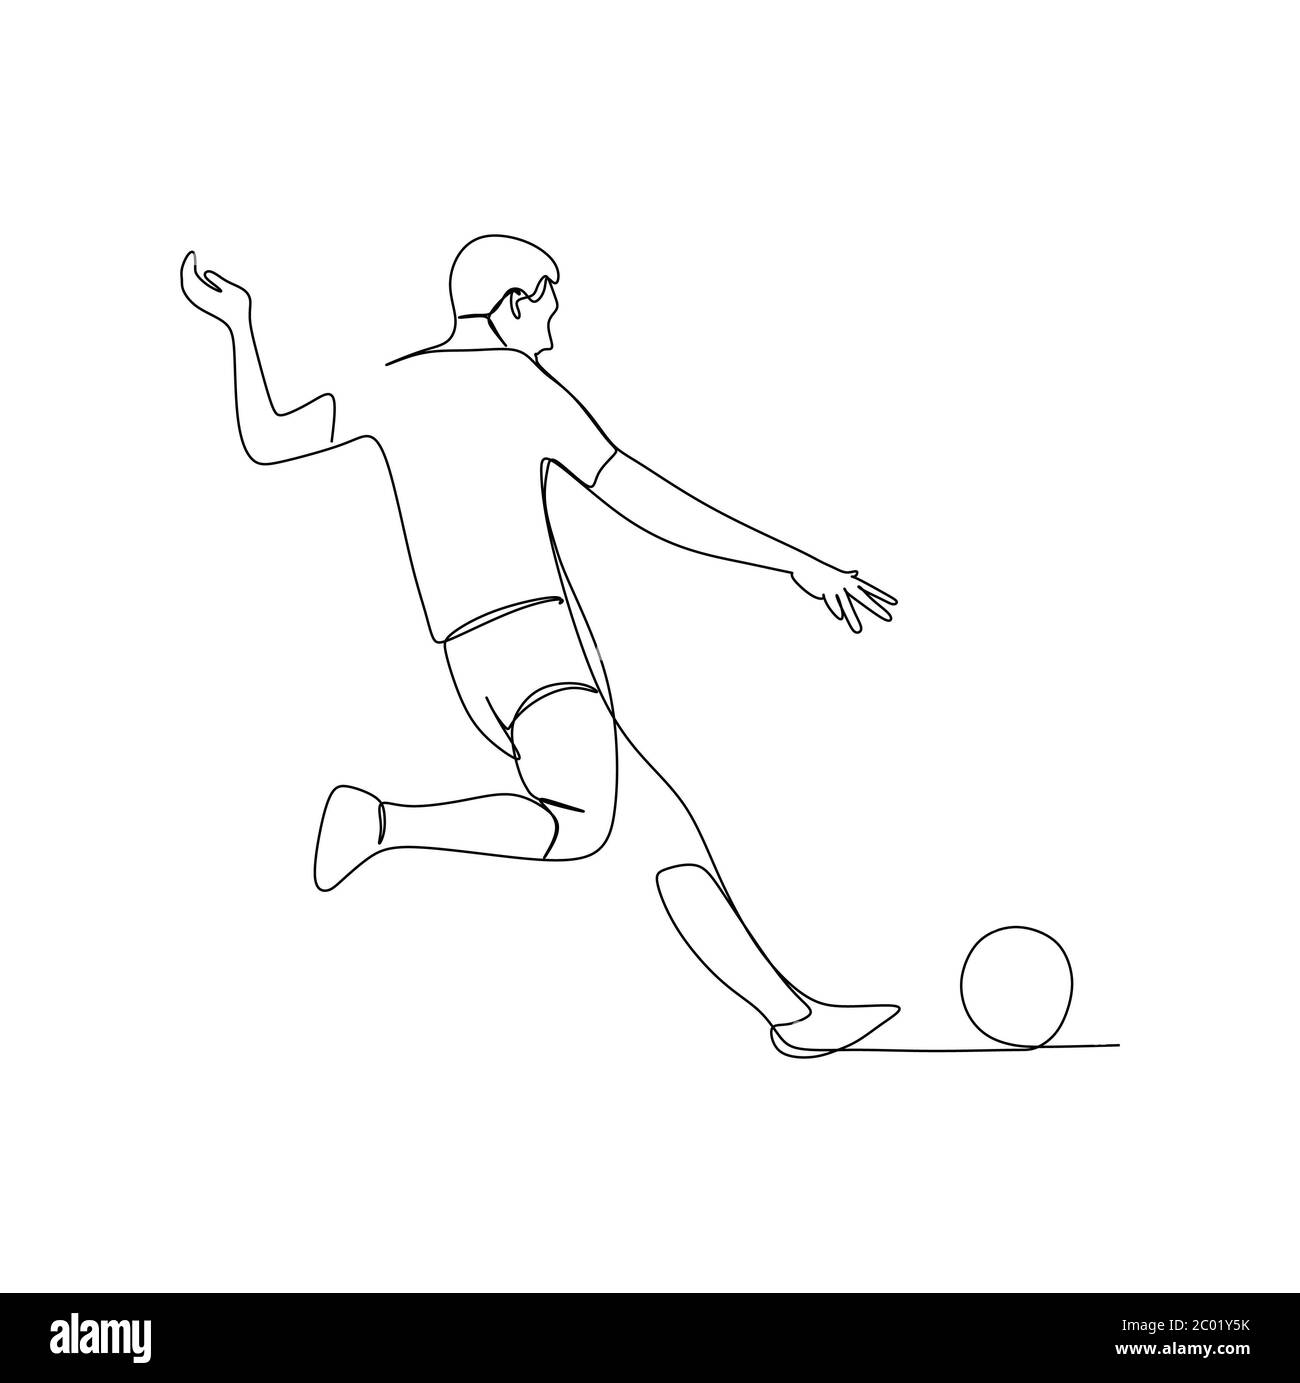 A man kicking a ball. Continuous one line drawing vector illustration Stock Photo